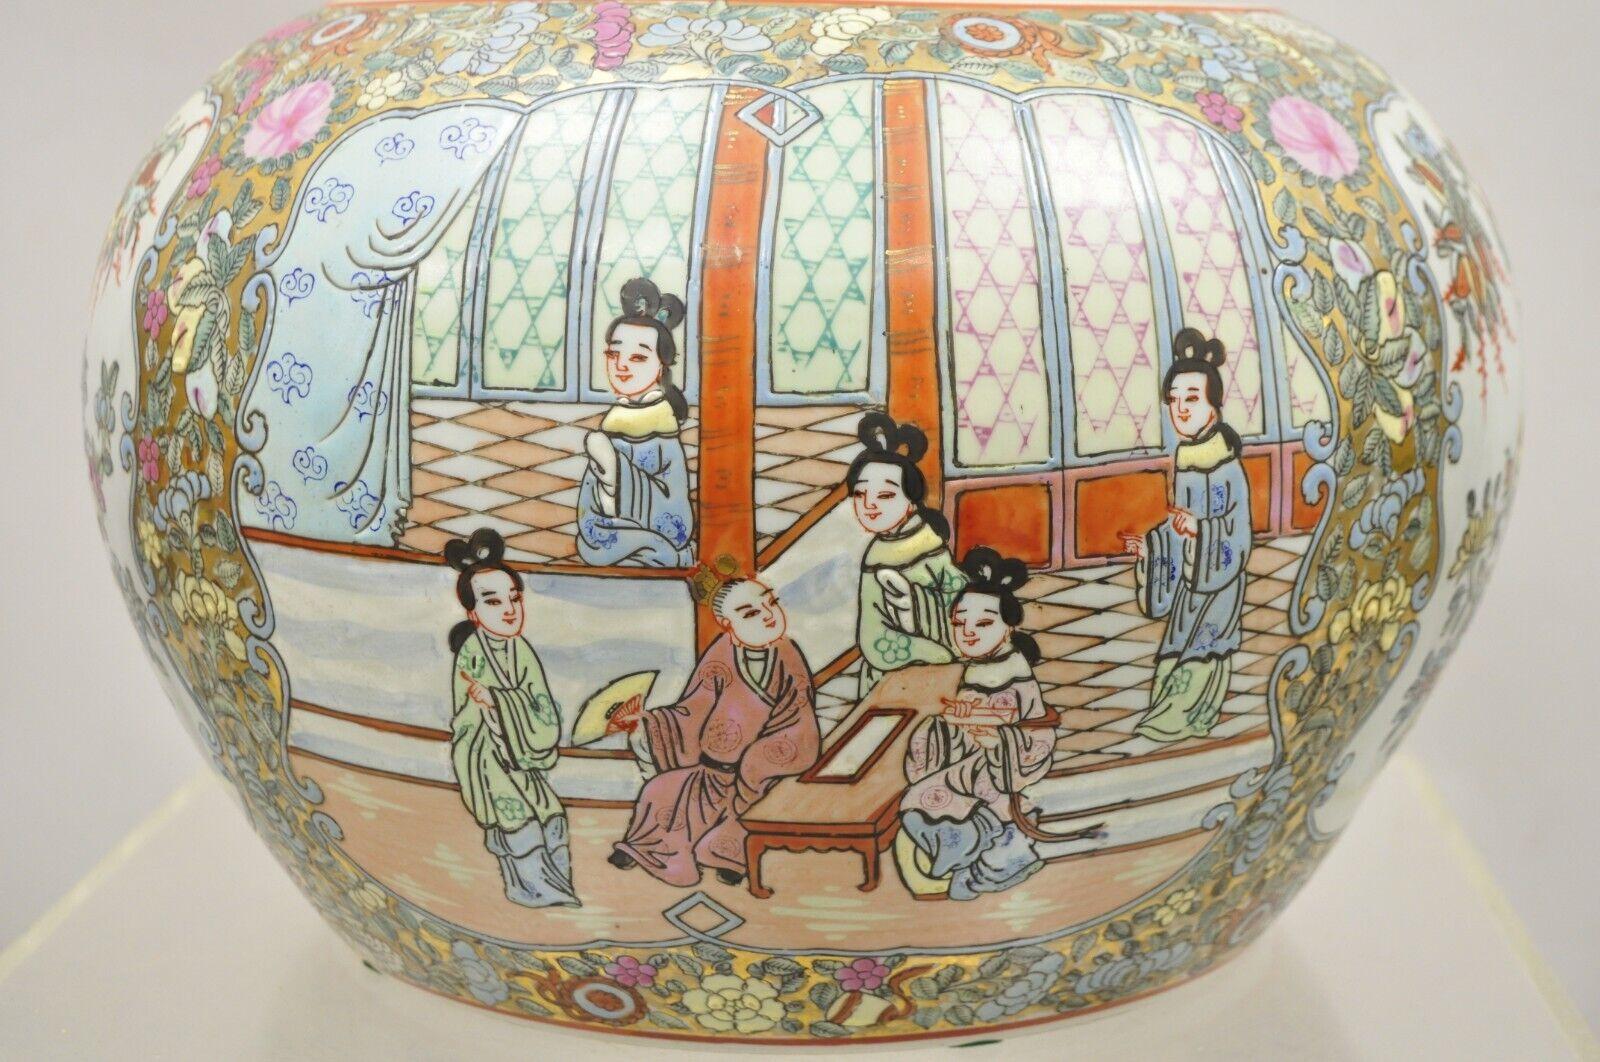 Vintage Chinese Export Porcelain Bulbous Vase with Figural Scenes. Item features unique scenes to both sides, beautiful color, very nice vintage item, great style and form. Circa Late 20th Century. Measurements: 10